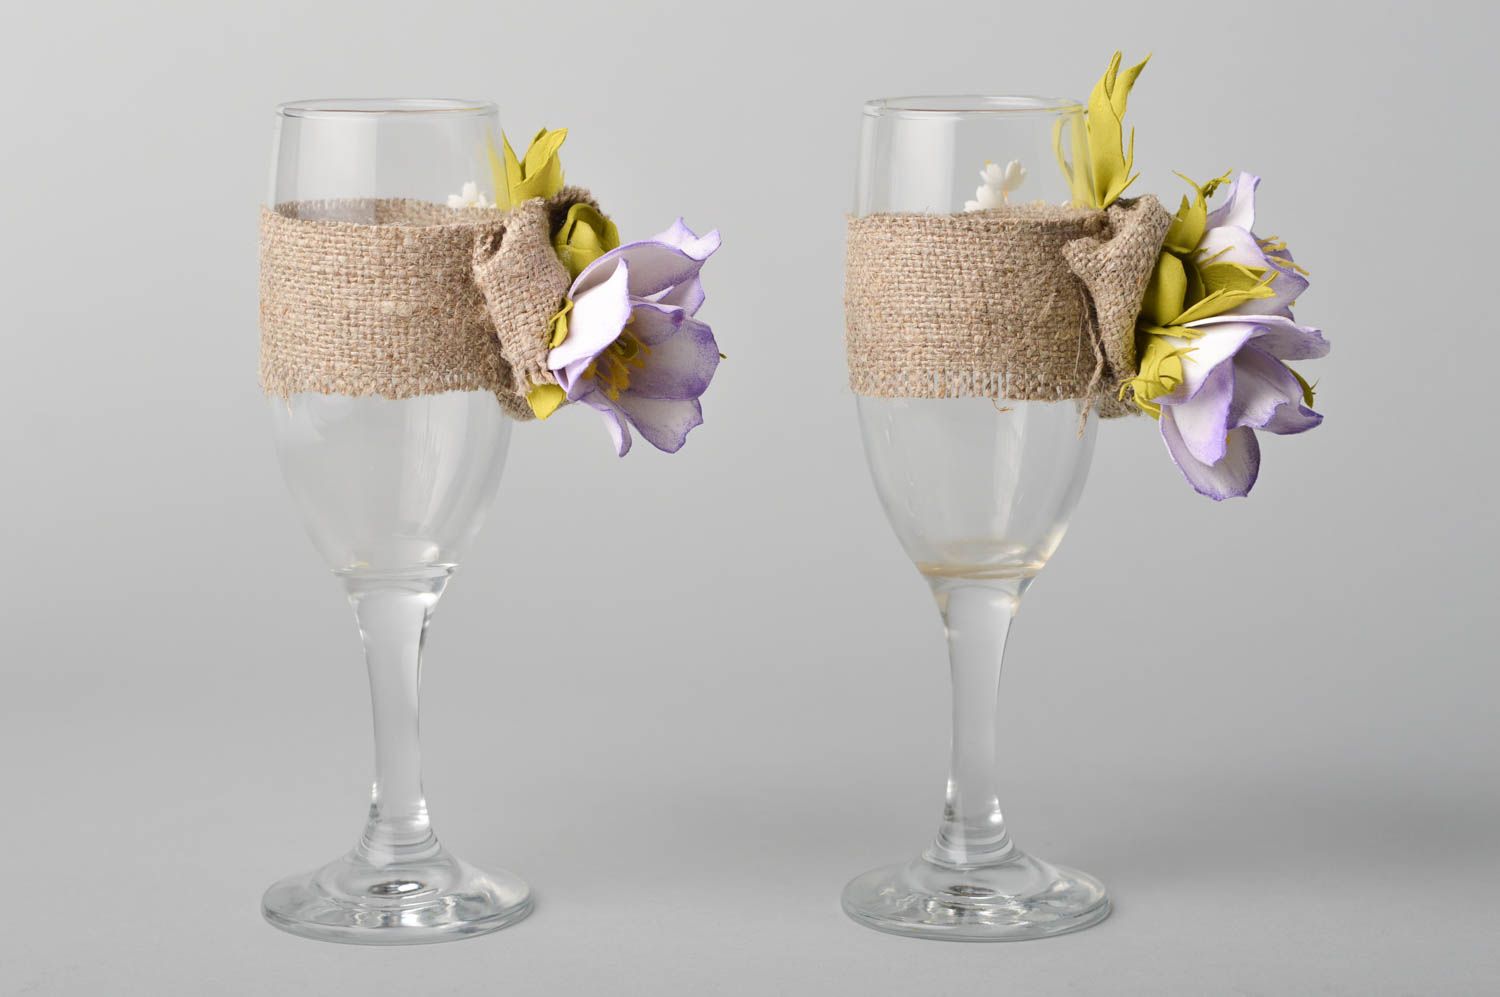 Handmade wedding glasses with flowers unusual glasses for newlyweds gift ideas photo 3